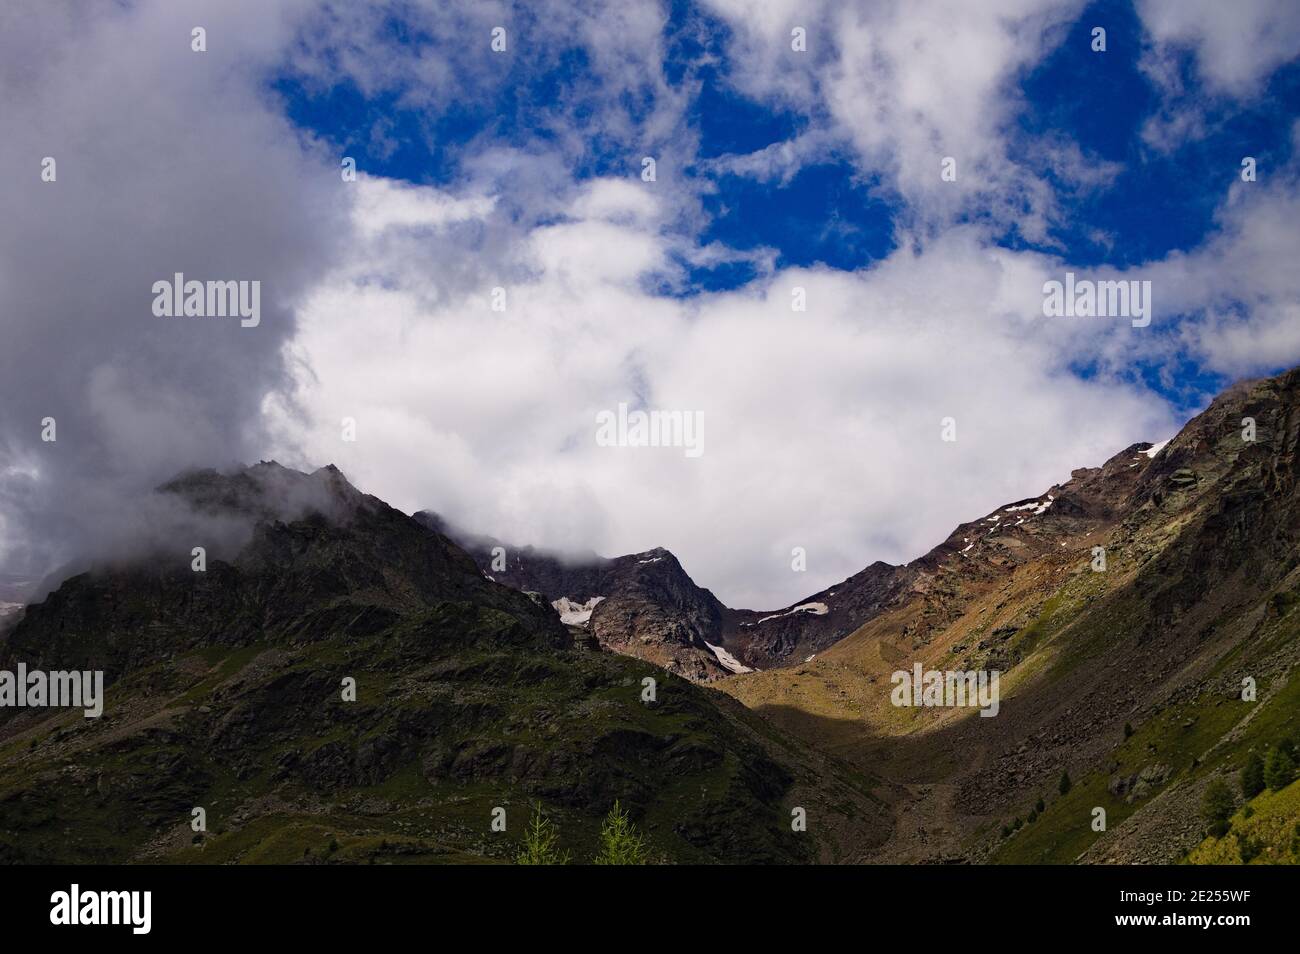 A mountain landscape with clouds in the sky on a summer day in the ...